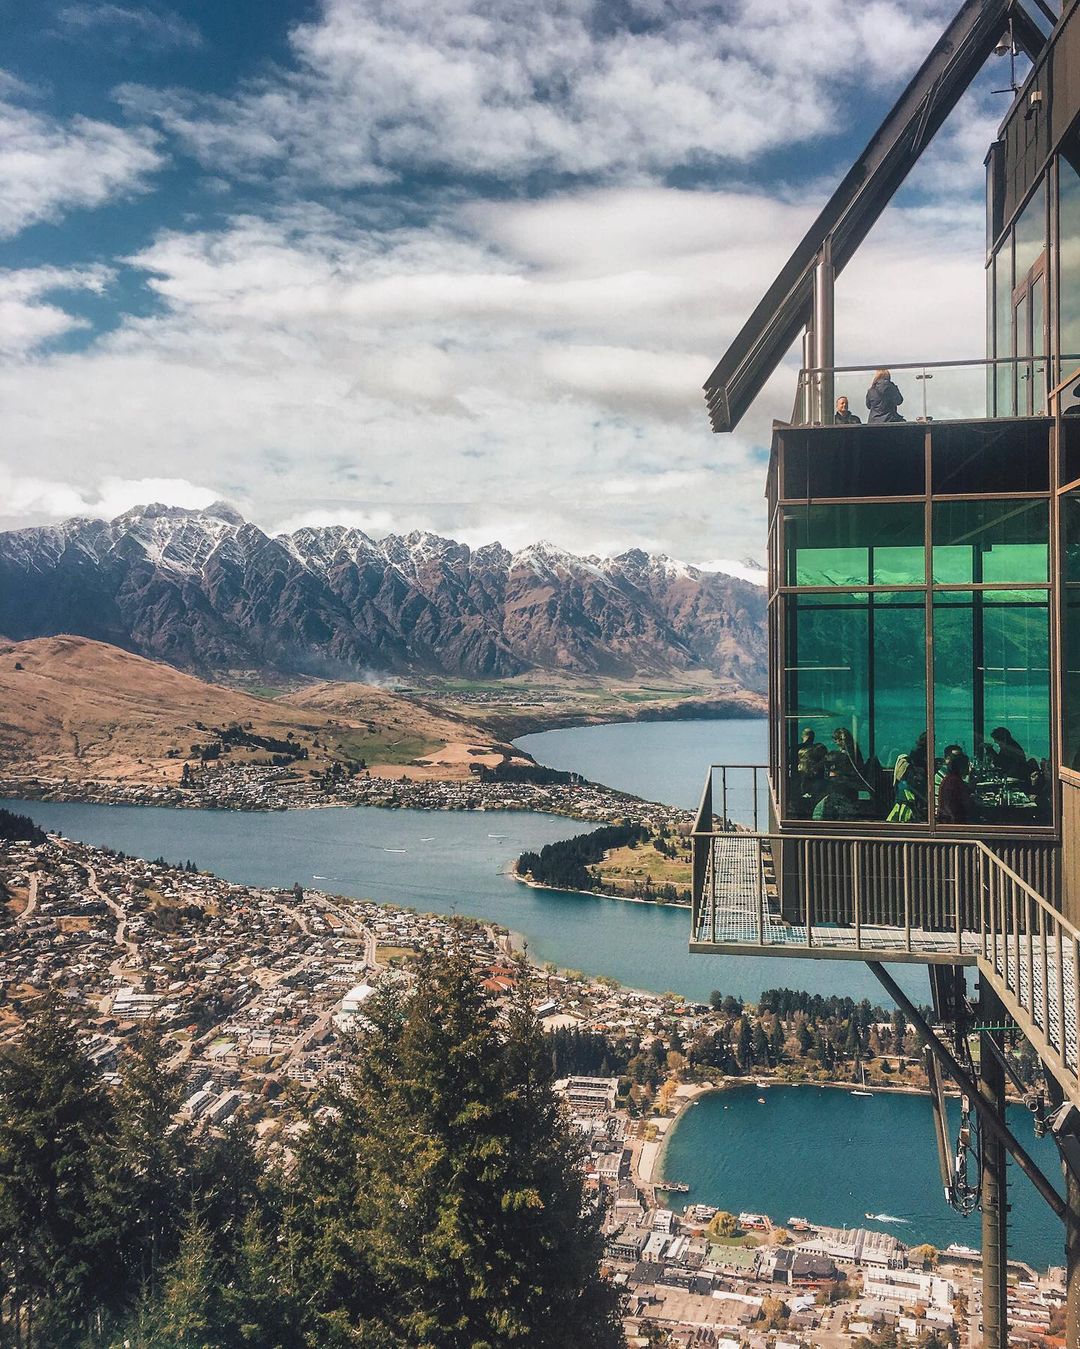 Views from the top of the Queenstown Skyline